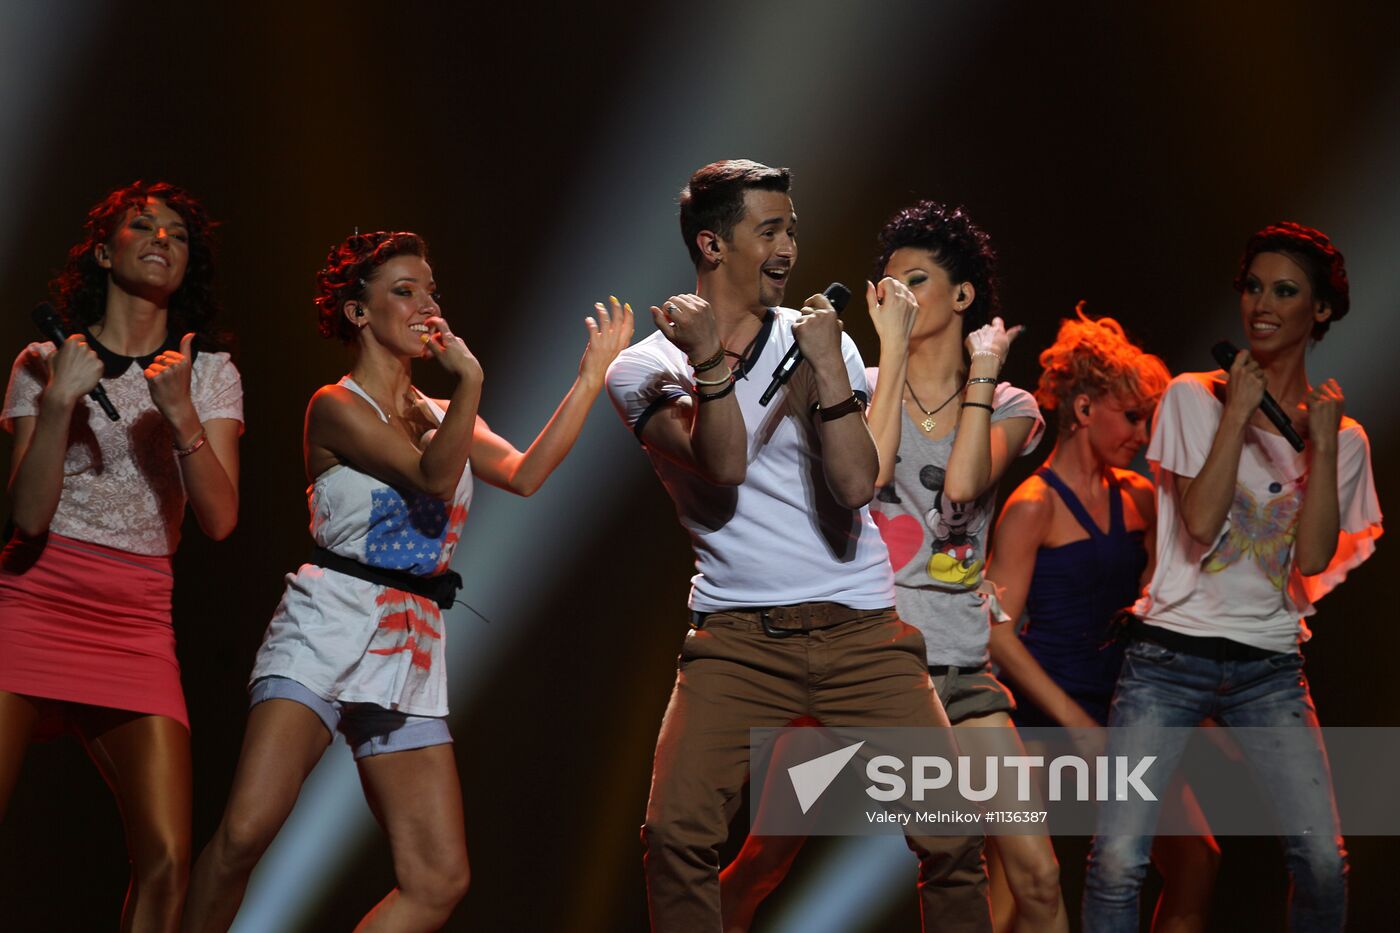 Full rehearsal for final show of Eurovision 2012 contest